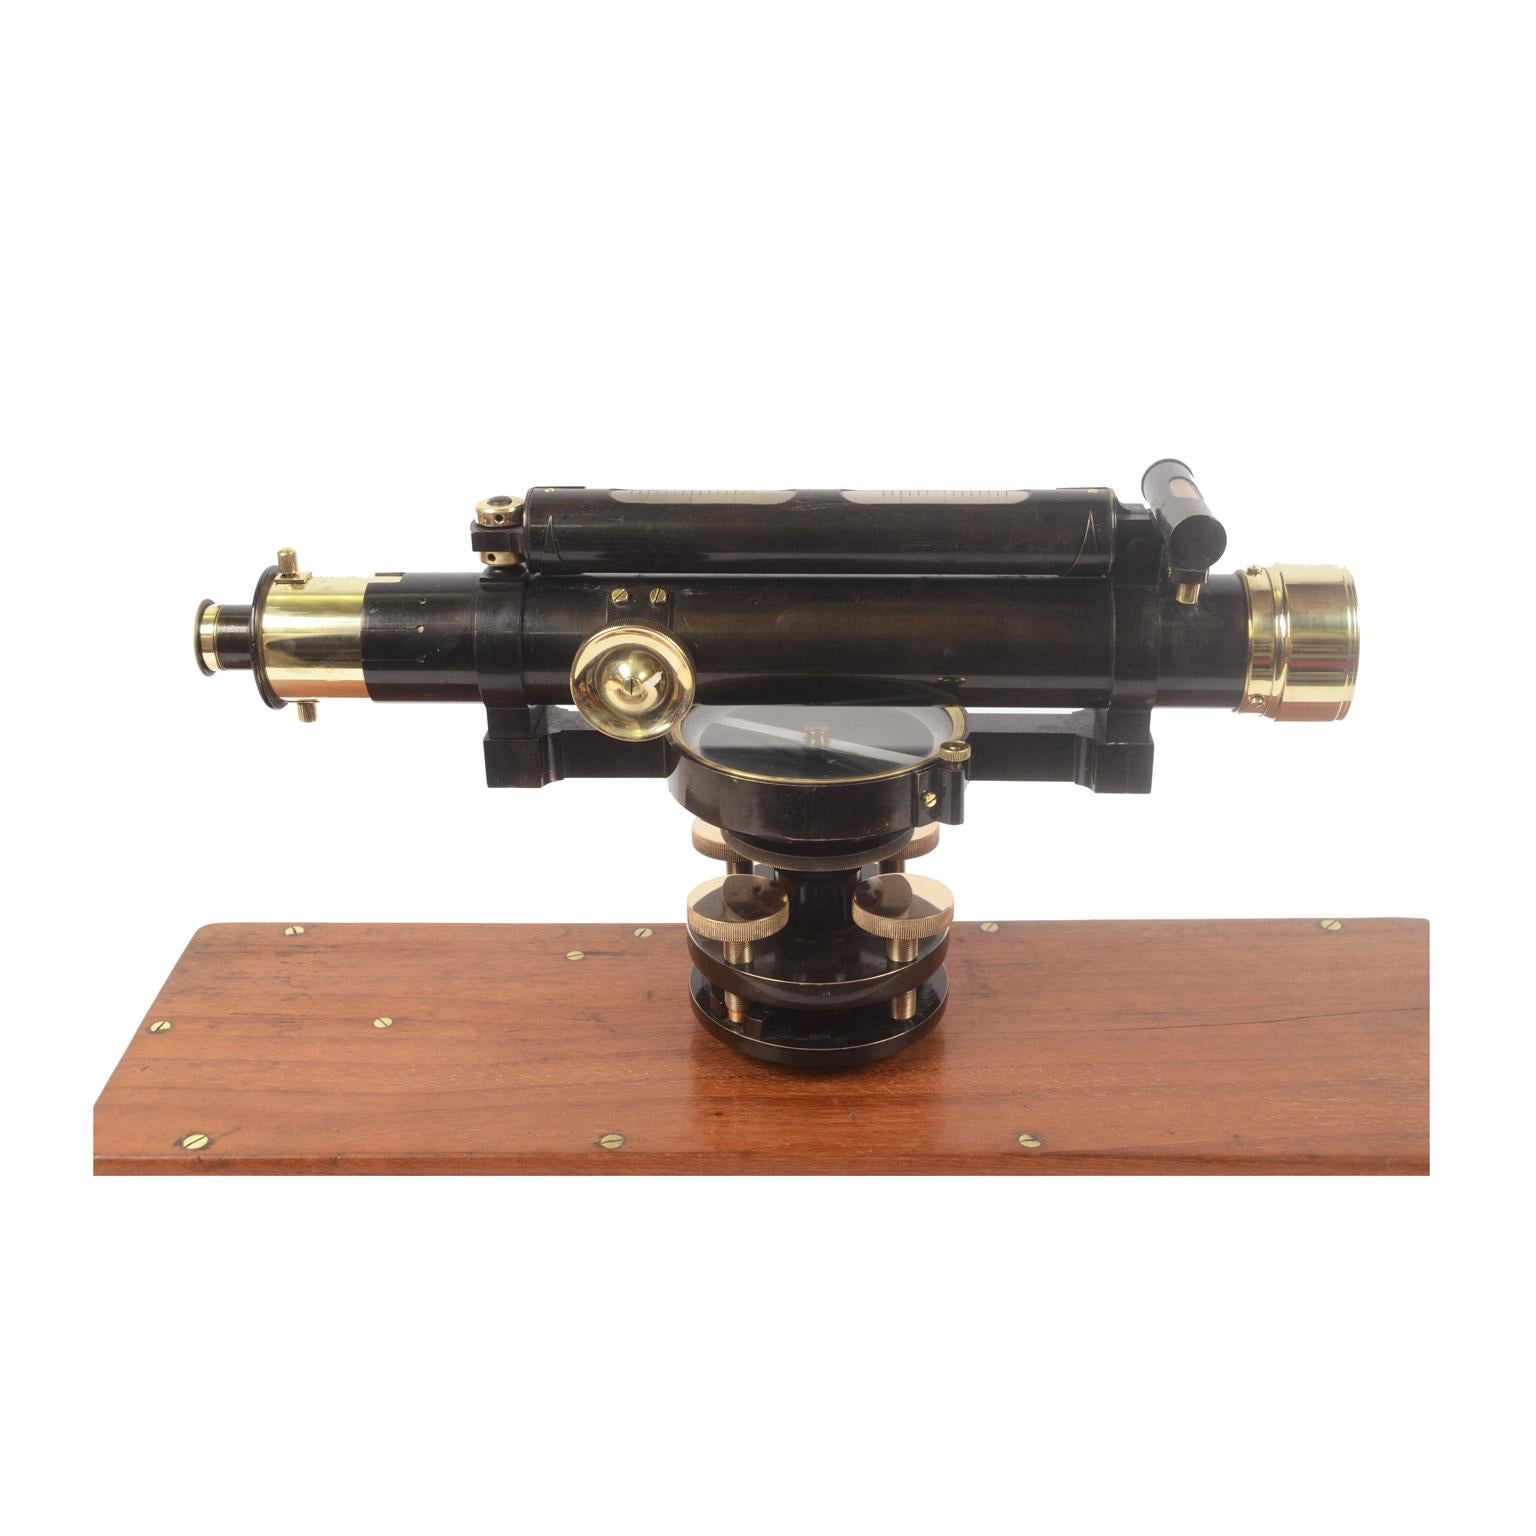 Topographic level signed W.F Stanley of burnished brass, from the second half of the 19th century. In excellent condition and complete with original mahogany box with brass hinges and closing hooks. The instrument consists of a telescope, two